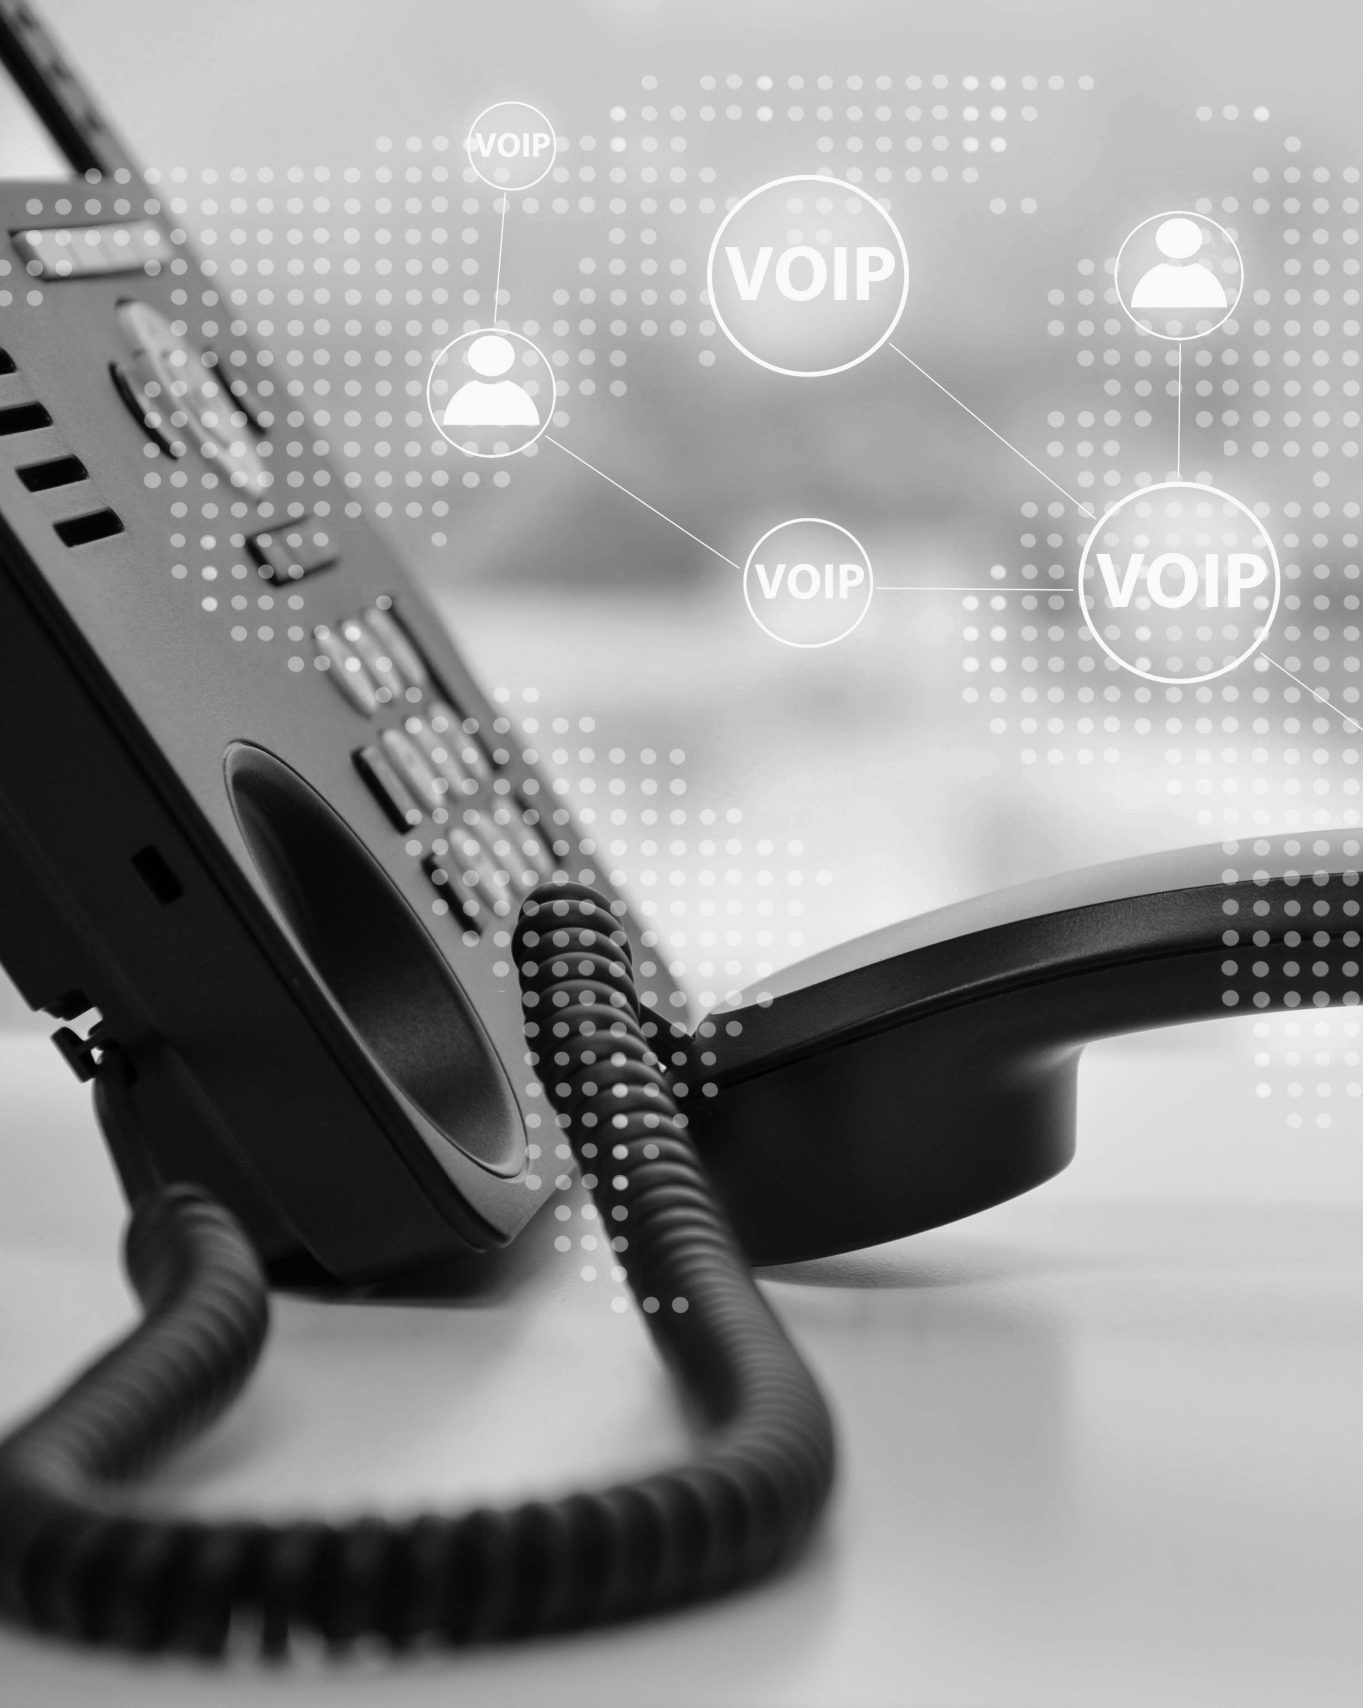 Communications solutions for companies and in-house IT departments